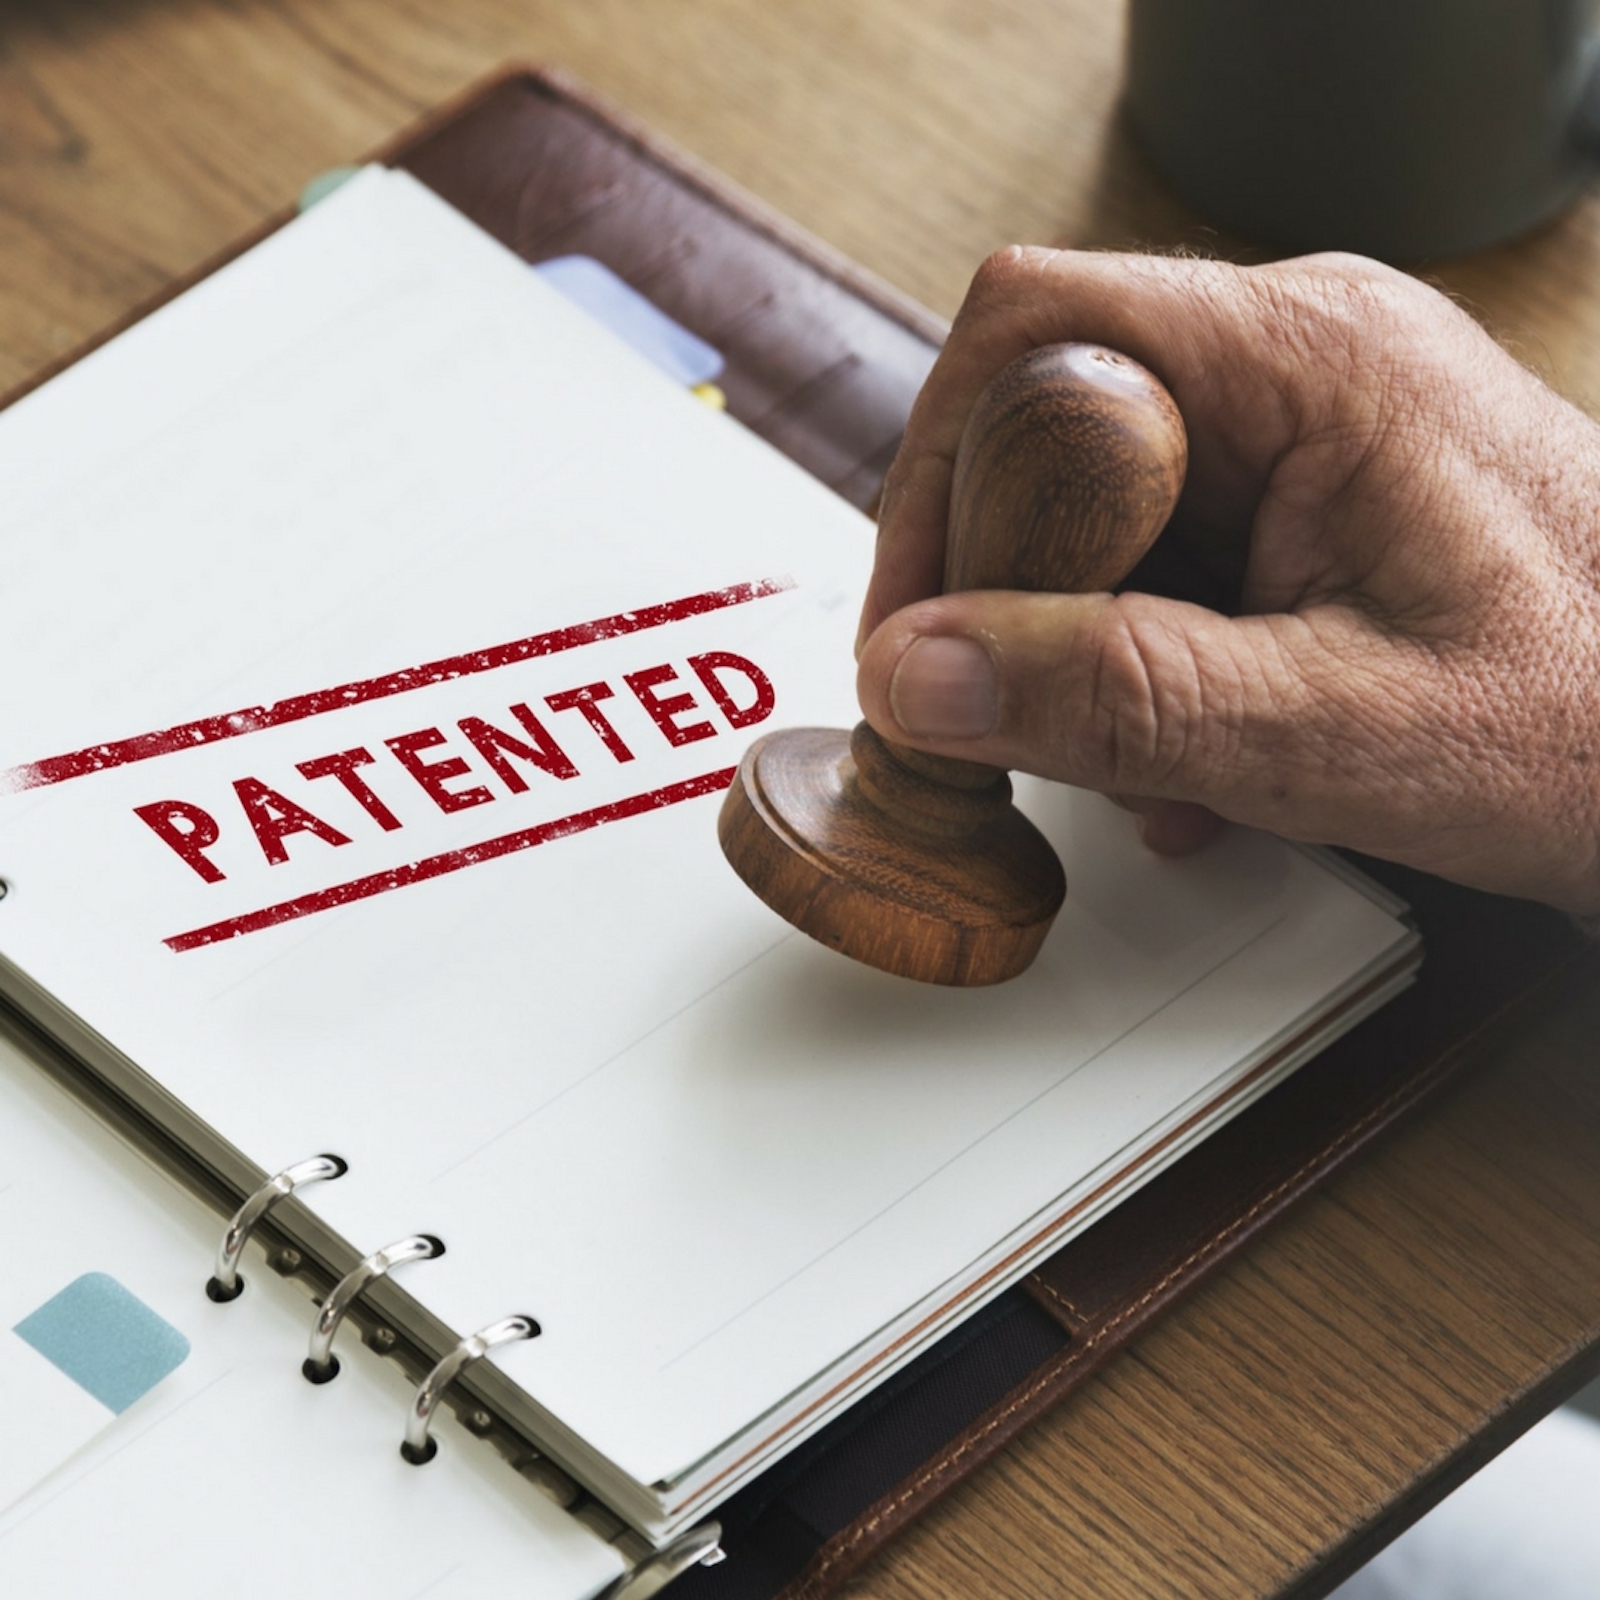 Bank of america files crypto currency patents 0.10960400 btc